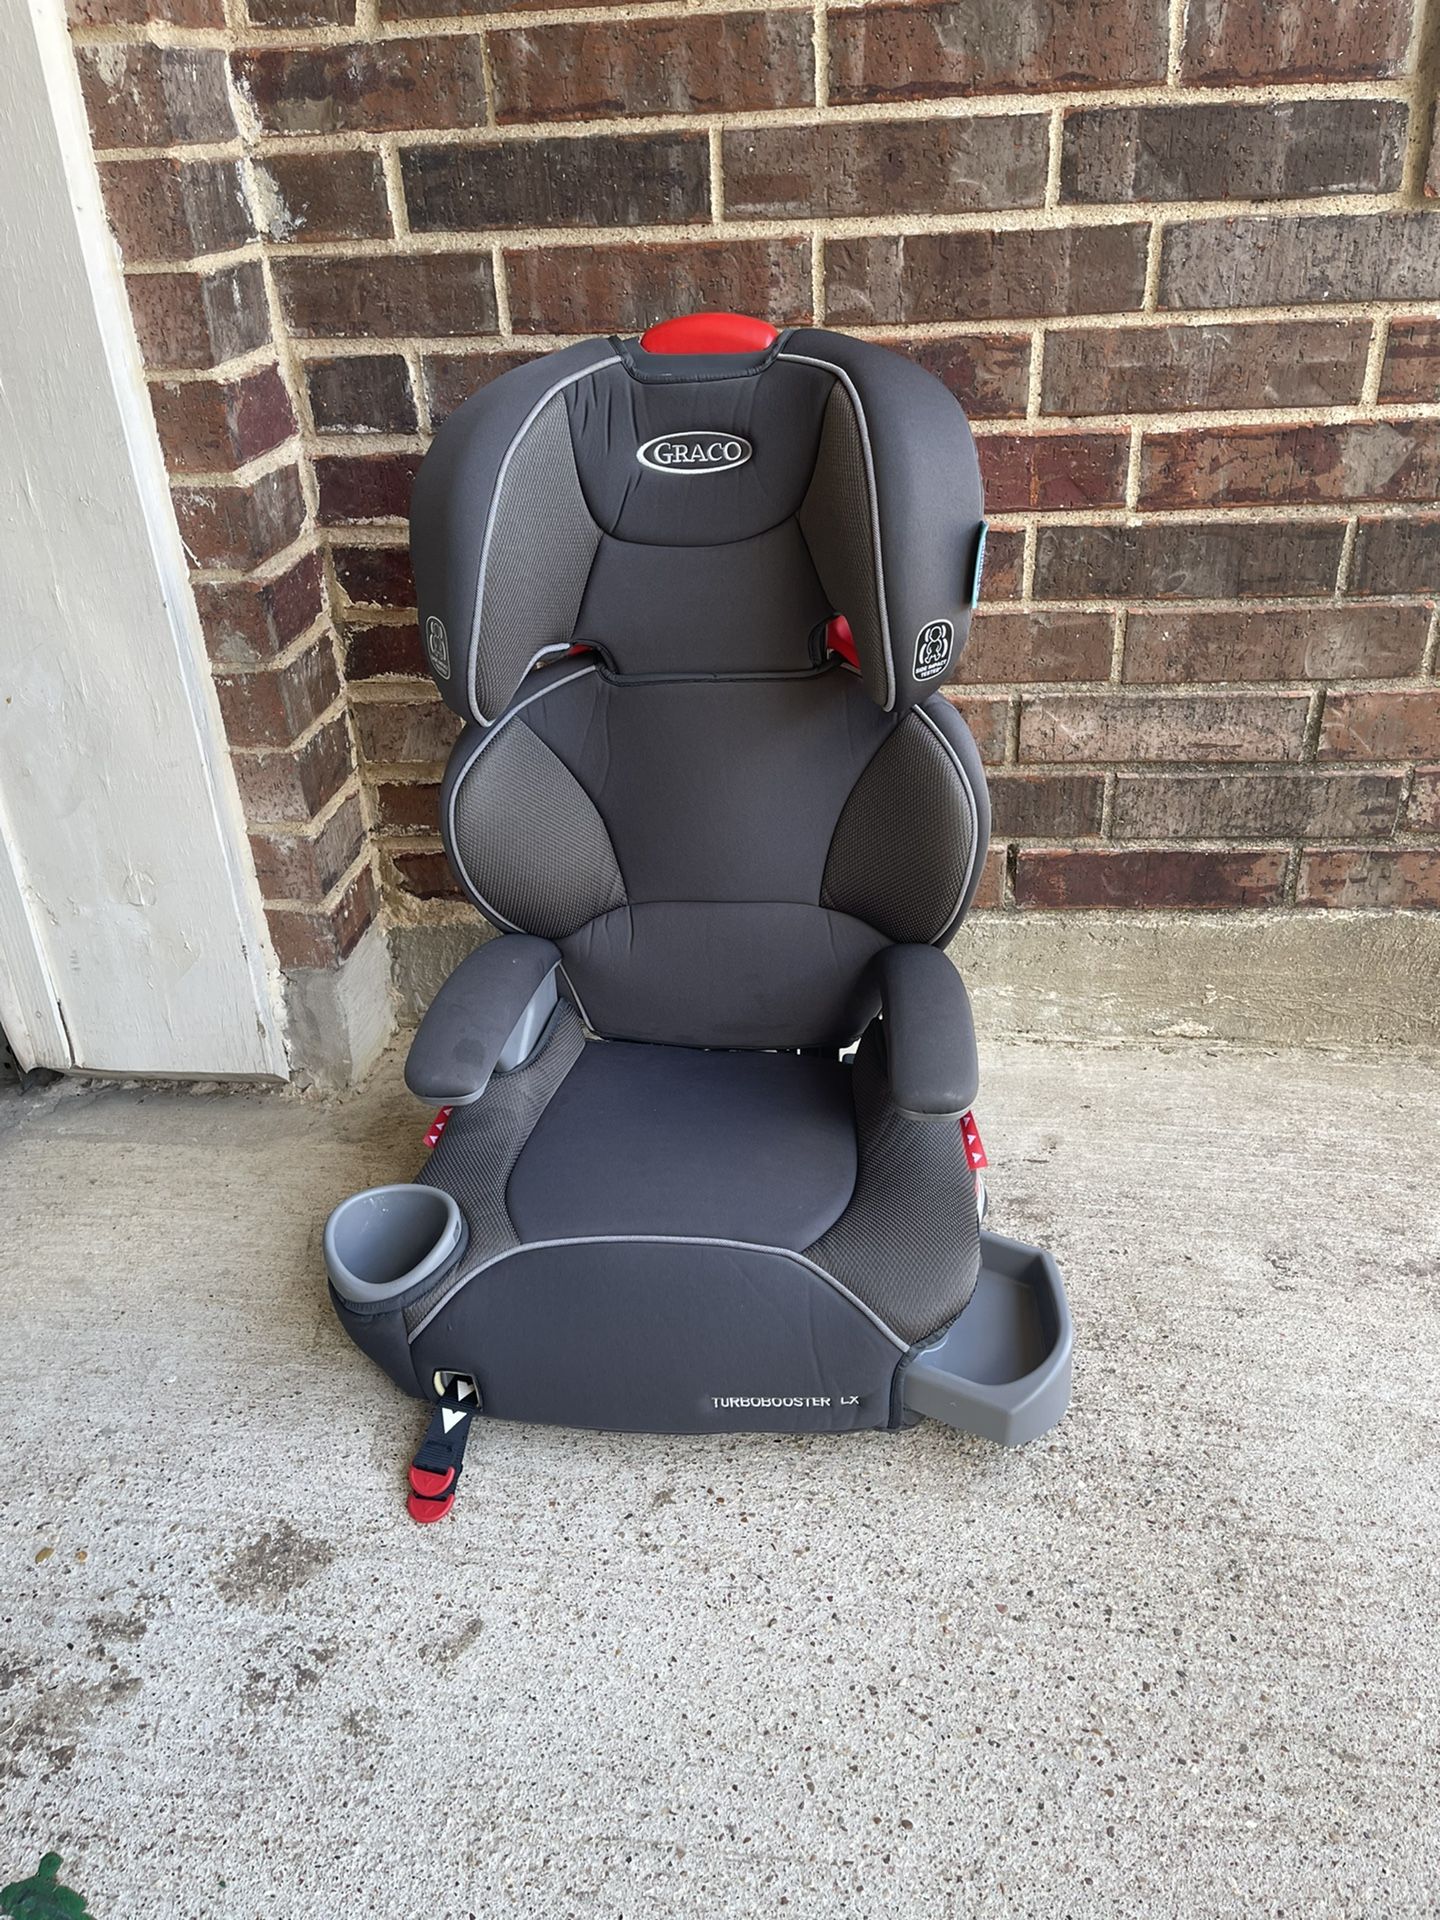 Turbobooster Lx Chair 